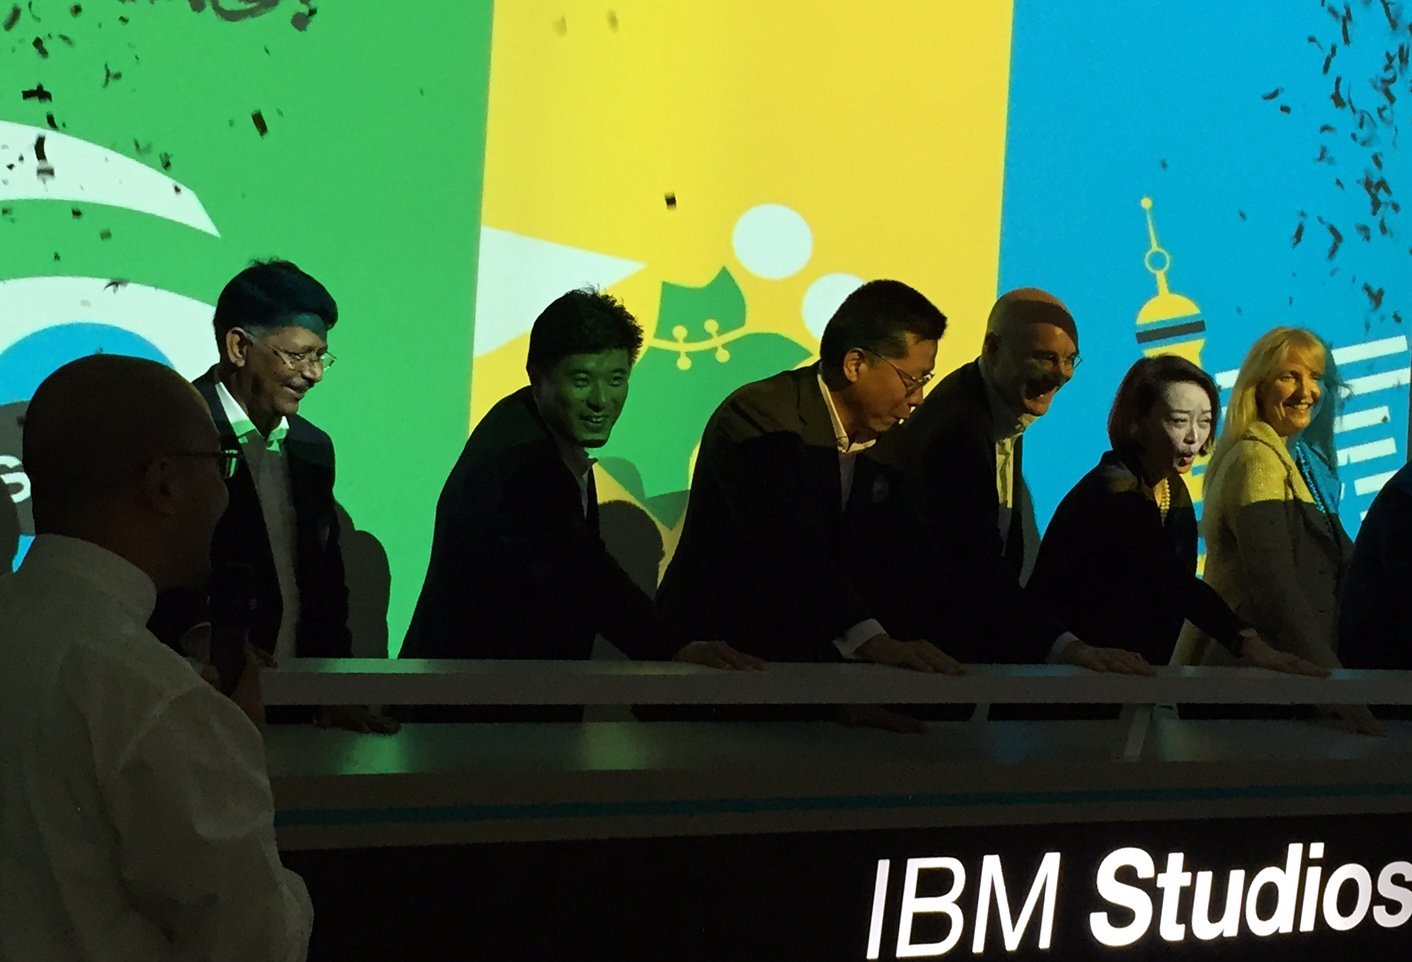 IBM is looking to develop technology services in China through the launch of its studio. Photo: Wu Nan